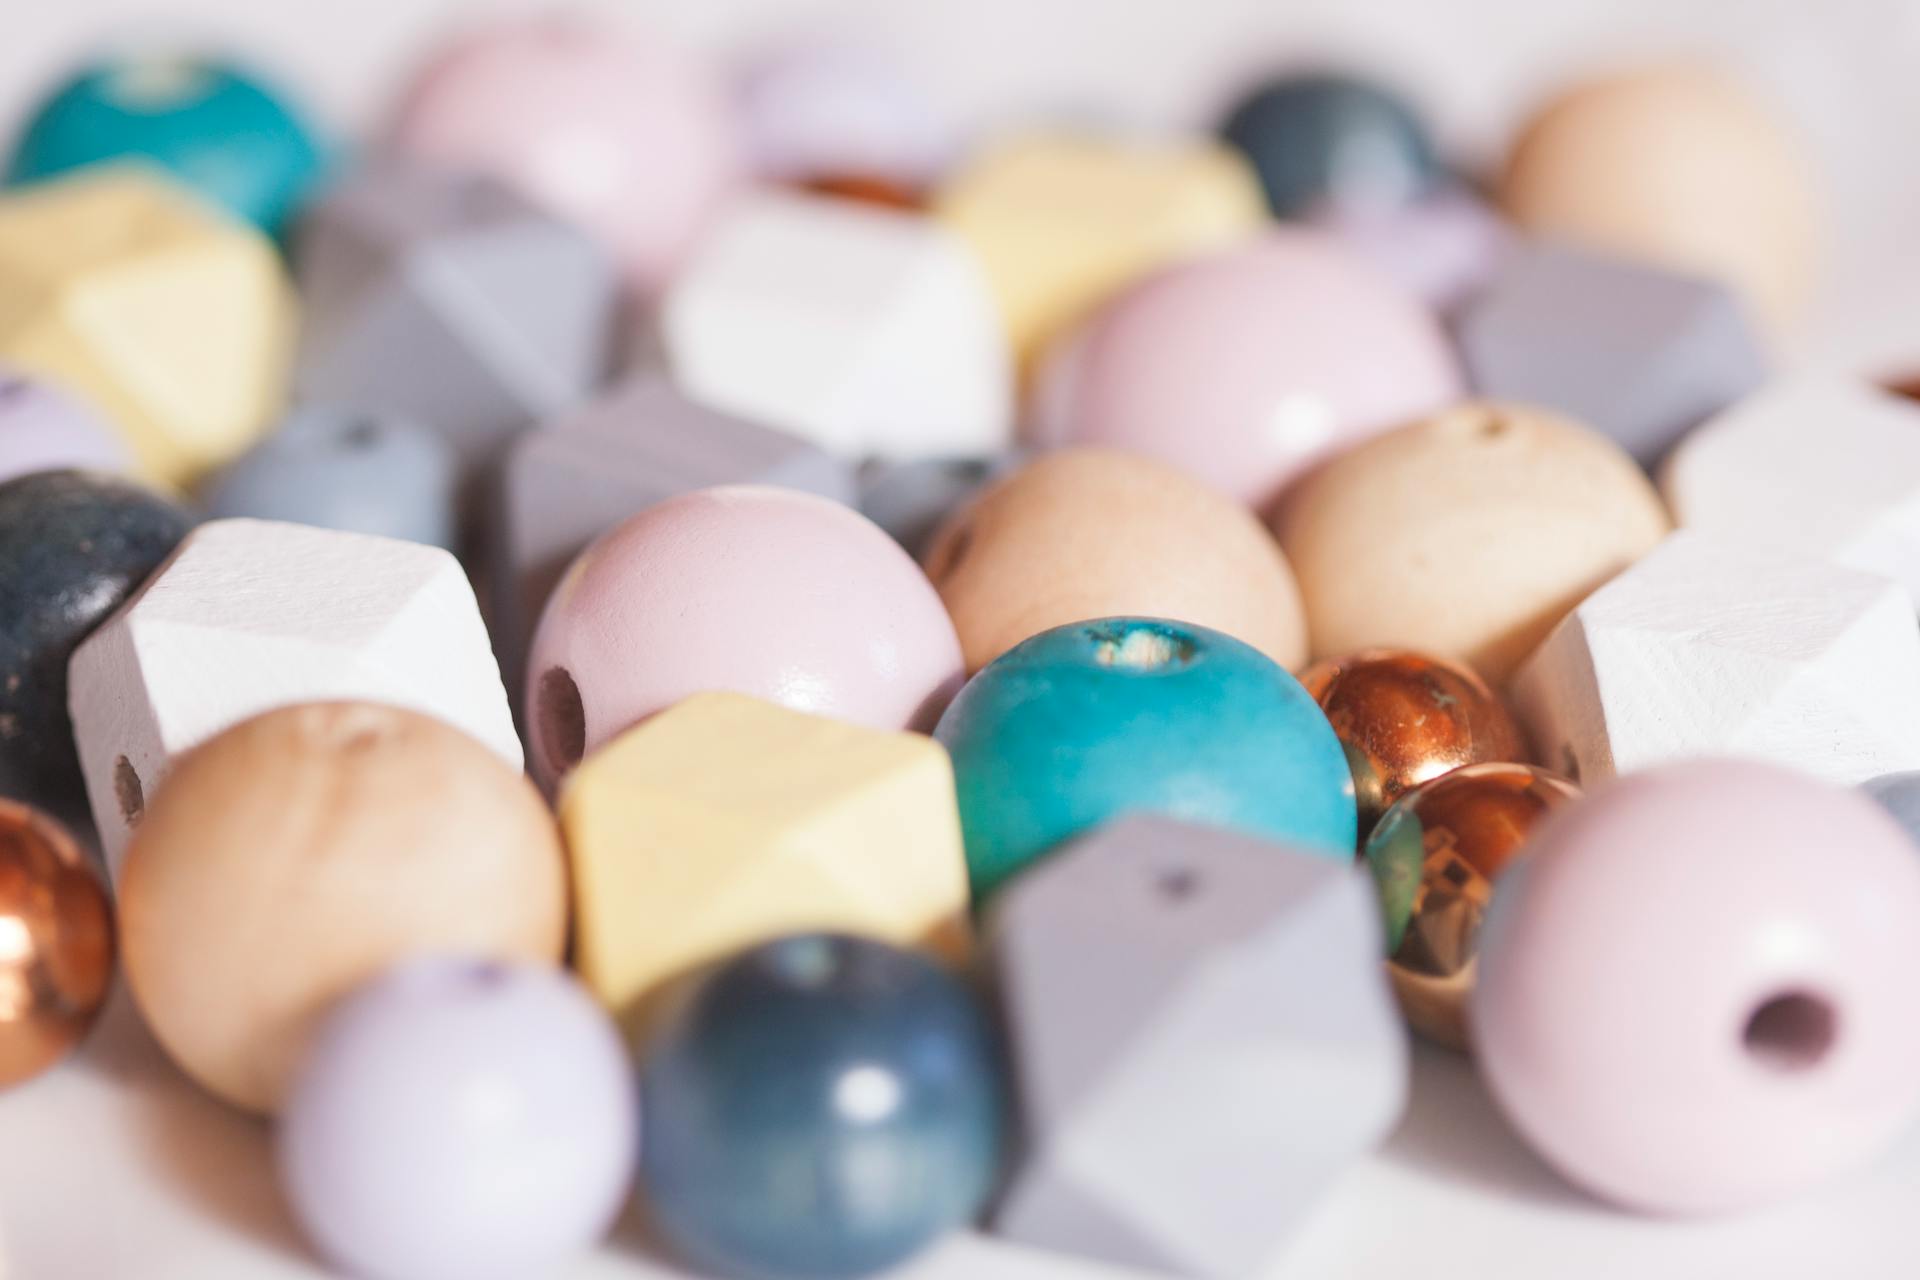 Assorted beads | Source: Pexels